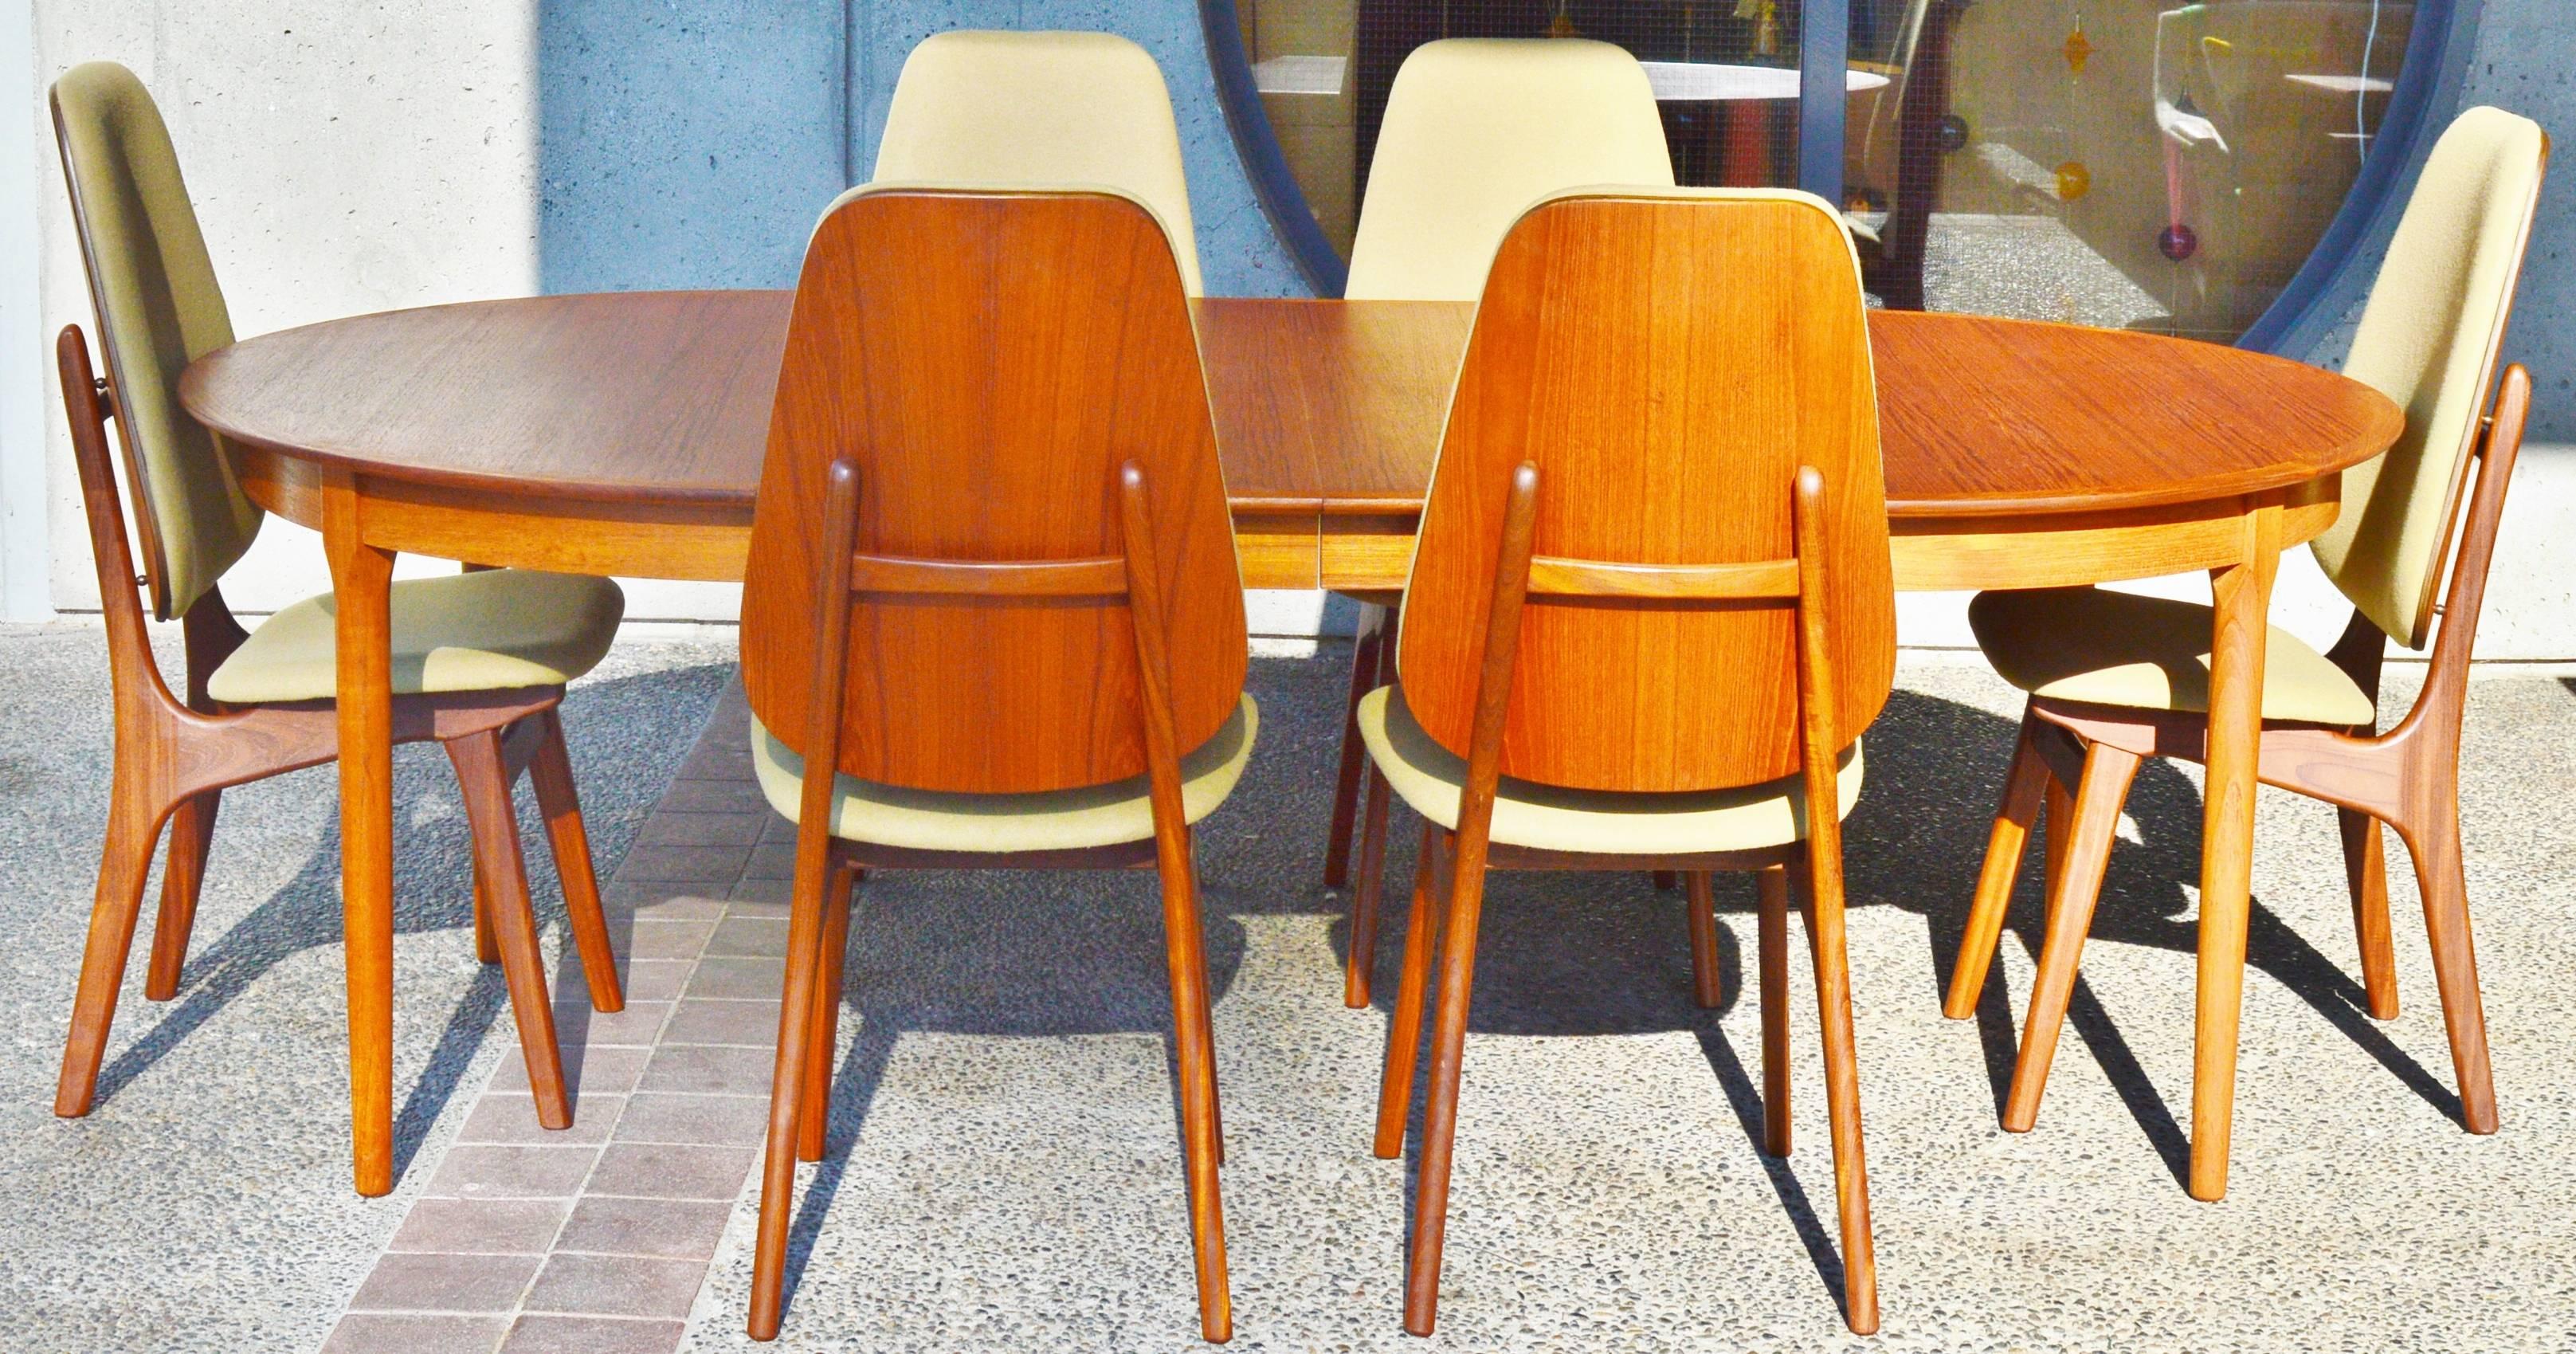 This lovely set of Danish modern teak tall shield-back dining chairs were designed by Arne Hovmand-Olsen and are the rare version with the very tall upholstered back which makes them amazingly comfortable. Note the floating backrest that is spaced